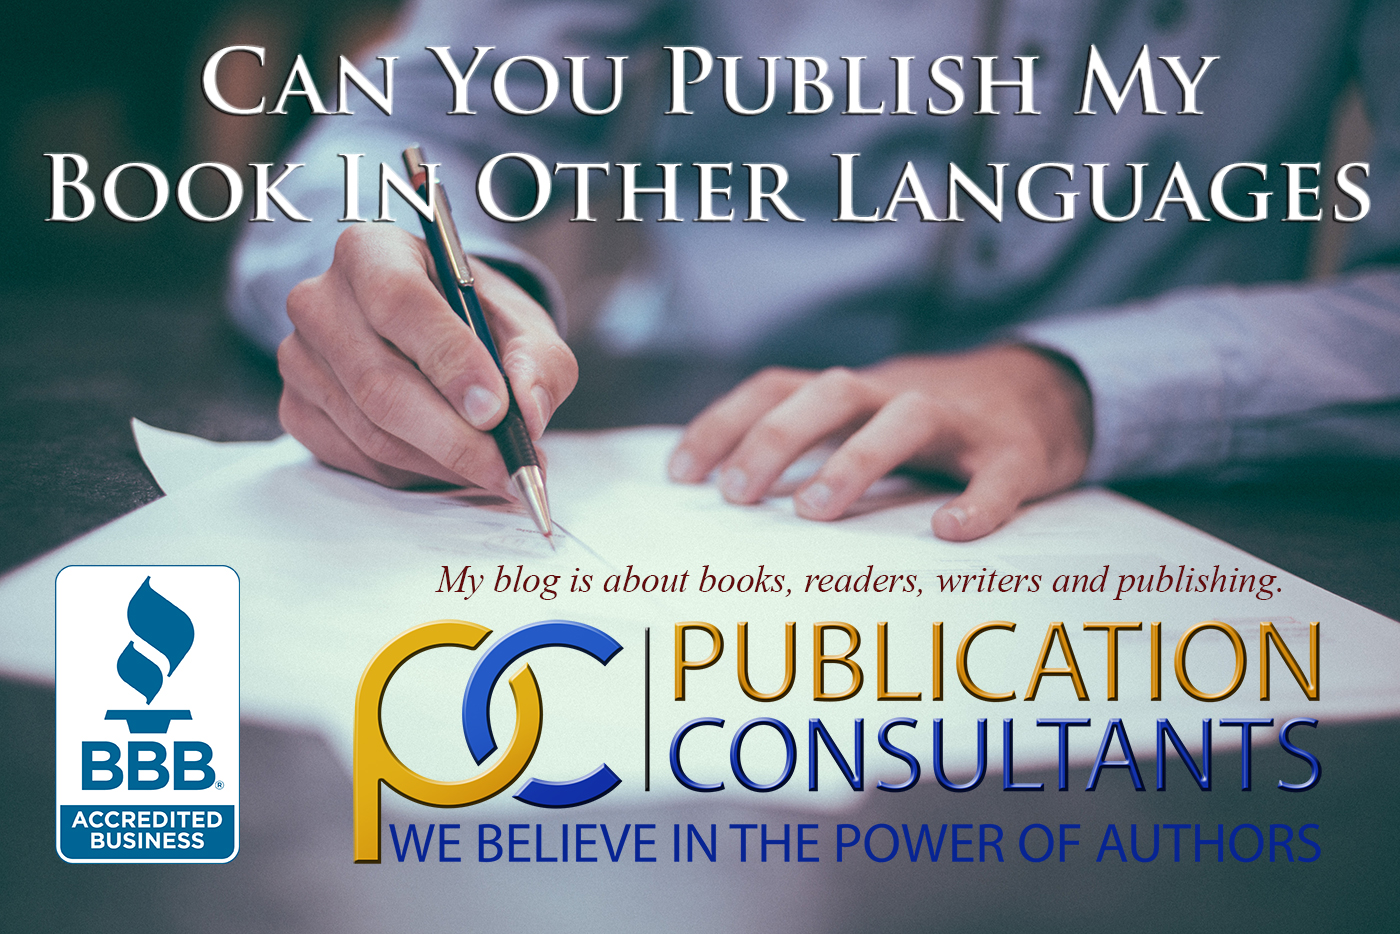 Can You Publish My Book in Other Languages?